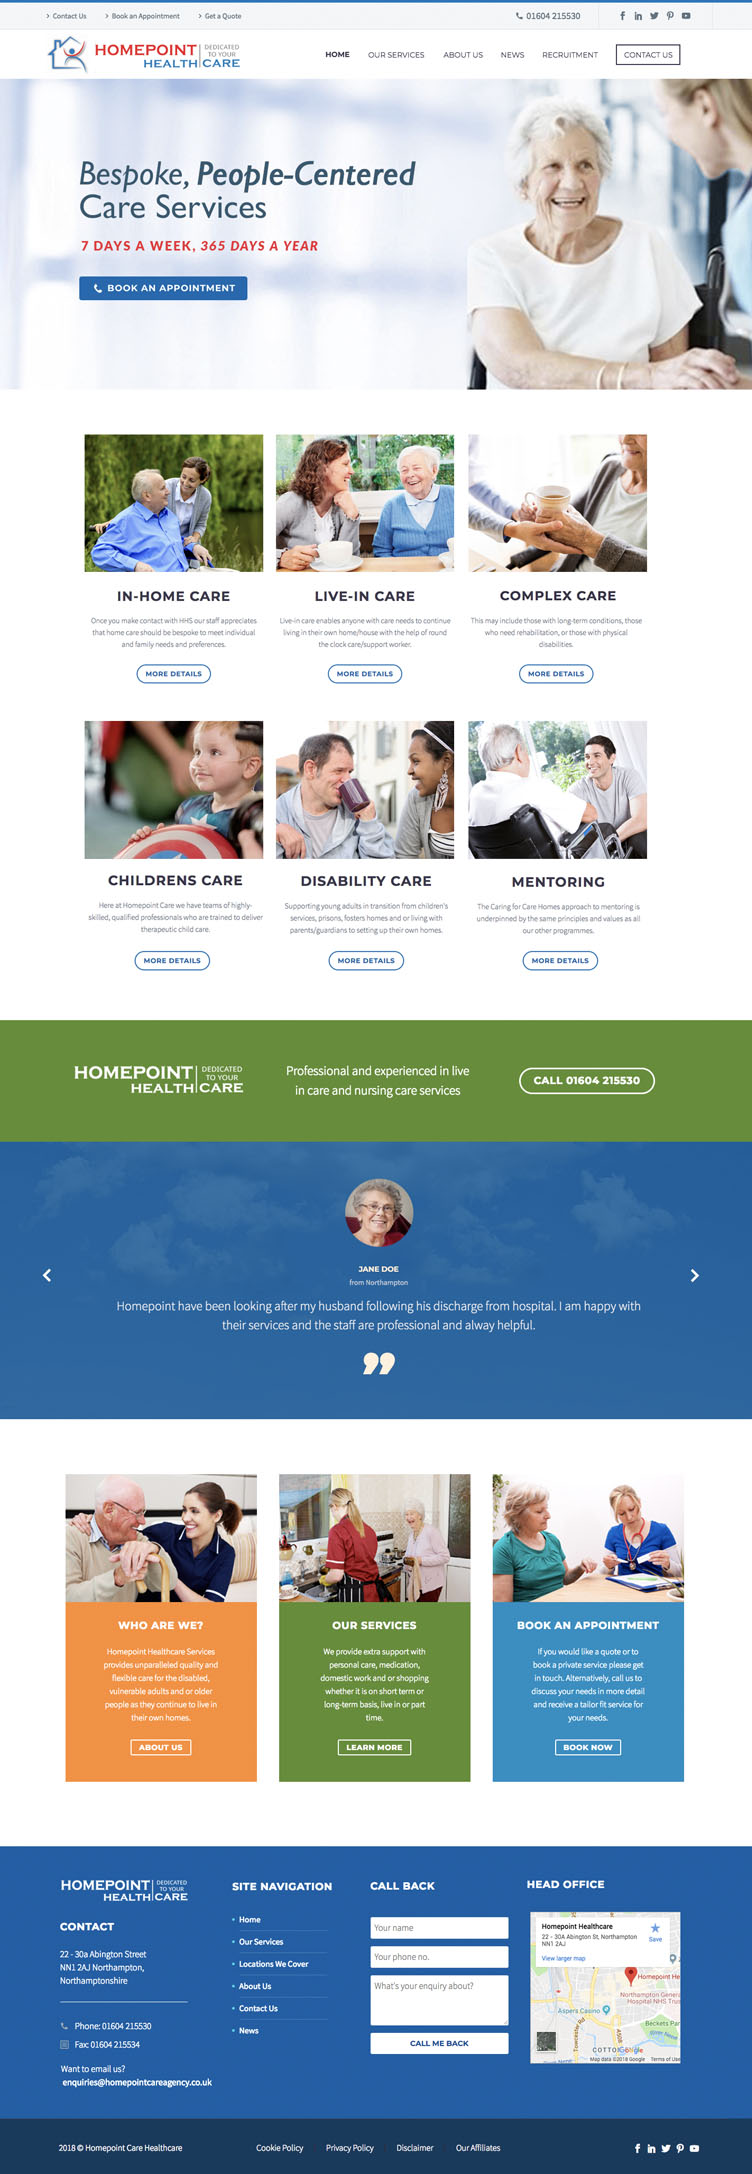 A full mockup of the website we built for Homepoint Healthcare in Bedfordshire